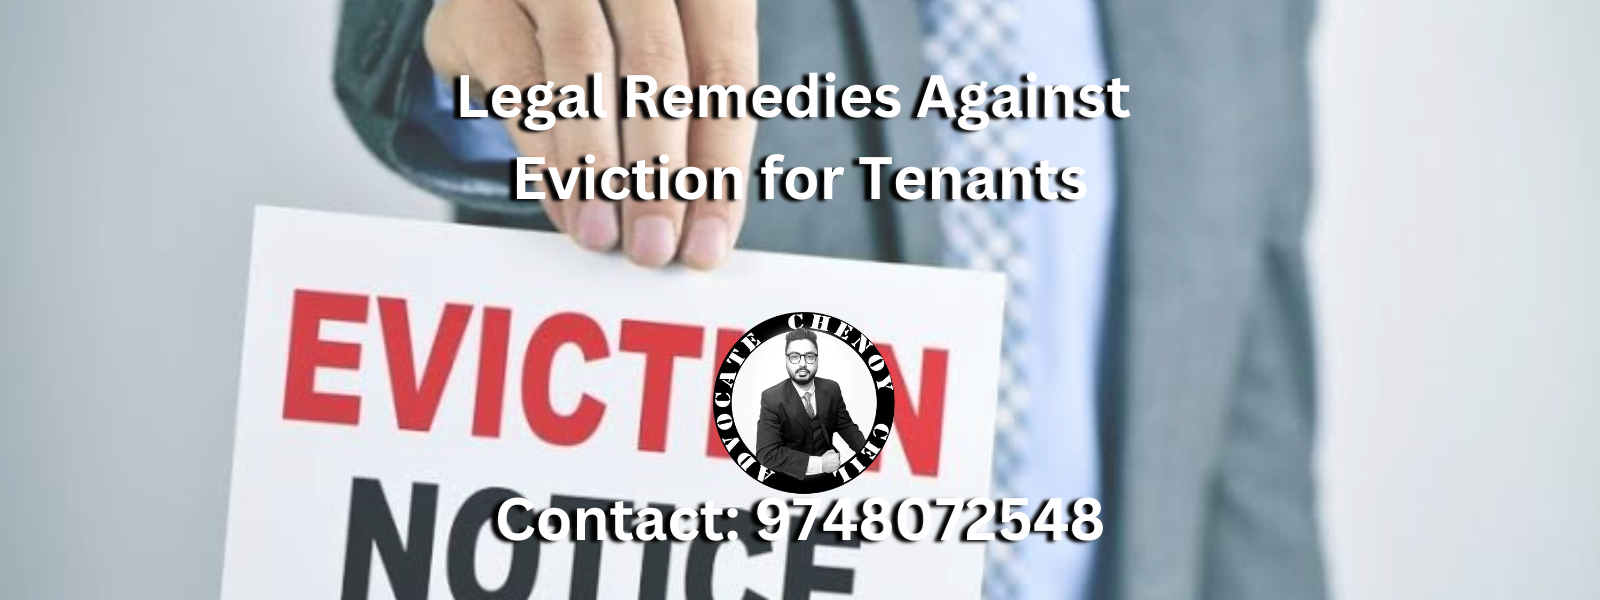 Legal Remedies Against Eviction for Tenants